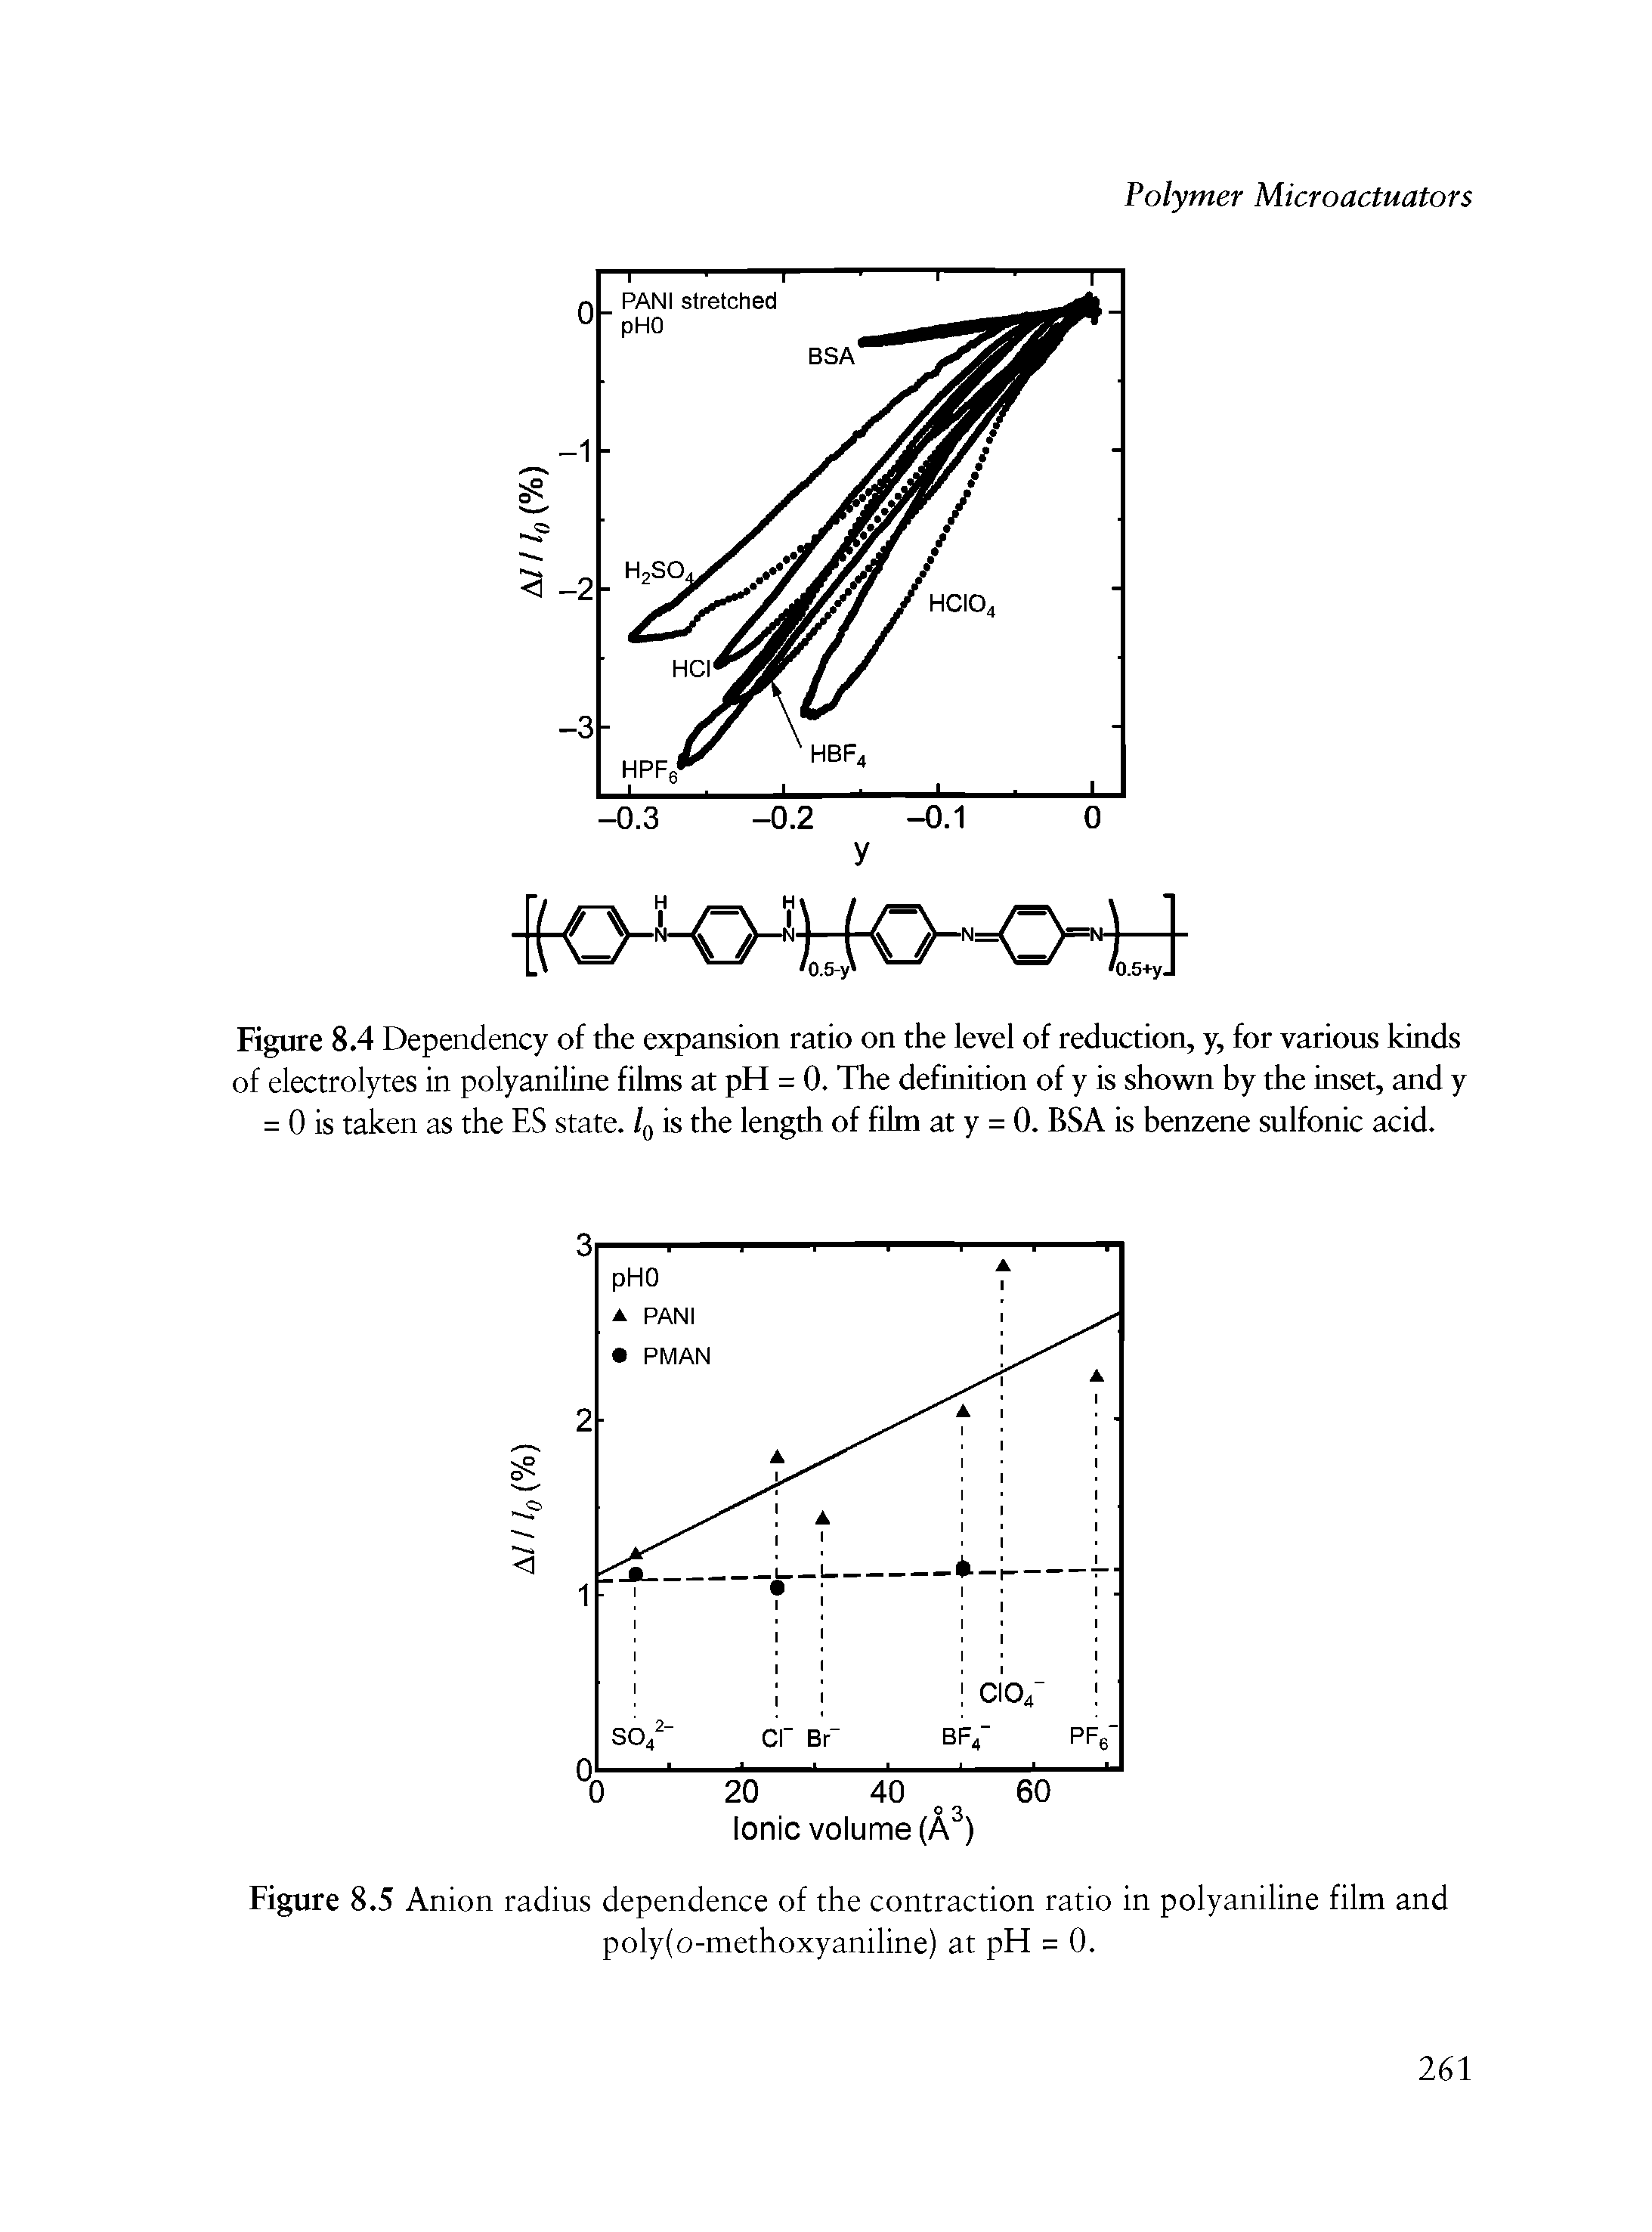 Figure 8.4 Dependency of the expansion ratio on the level of reduction, y, for various kinds of electrolytes in polyaniline films at pH = 0. The definition of y is shown by the inset, and y = 0 is taken as the ES state, /q is the length of film at y = 0. BSA is benzene sulfonic acid.